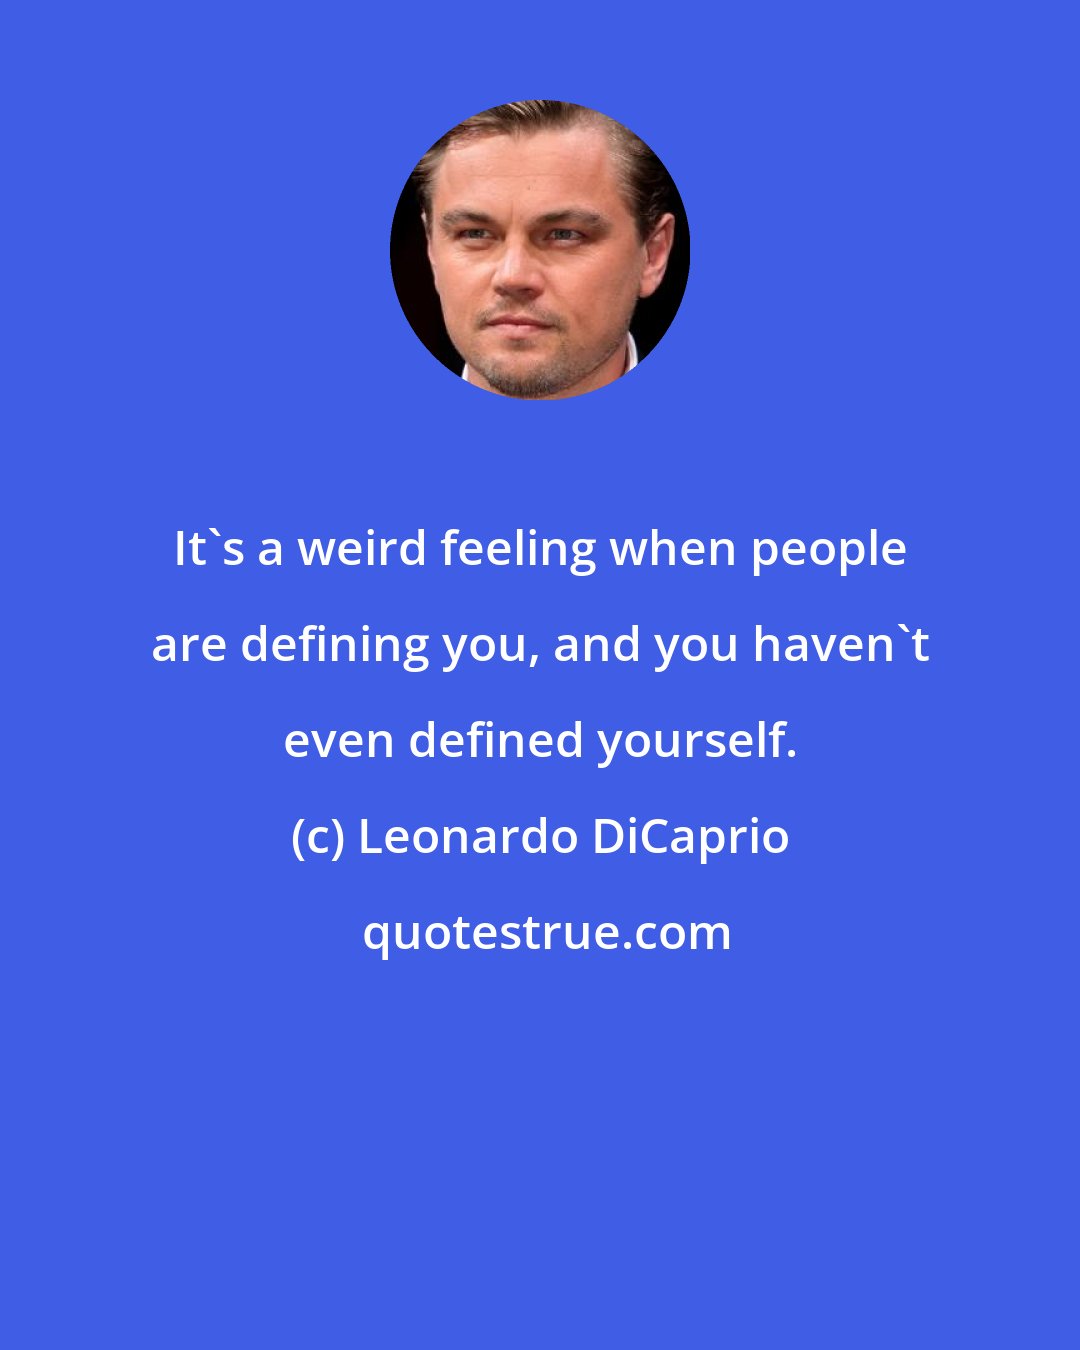 Leonardo DiCaprio: It's a weird feeling when people are defining you, and you haven't even defined yourself.